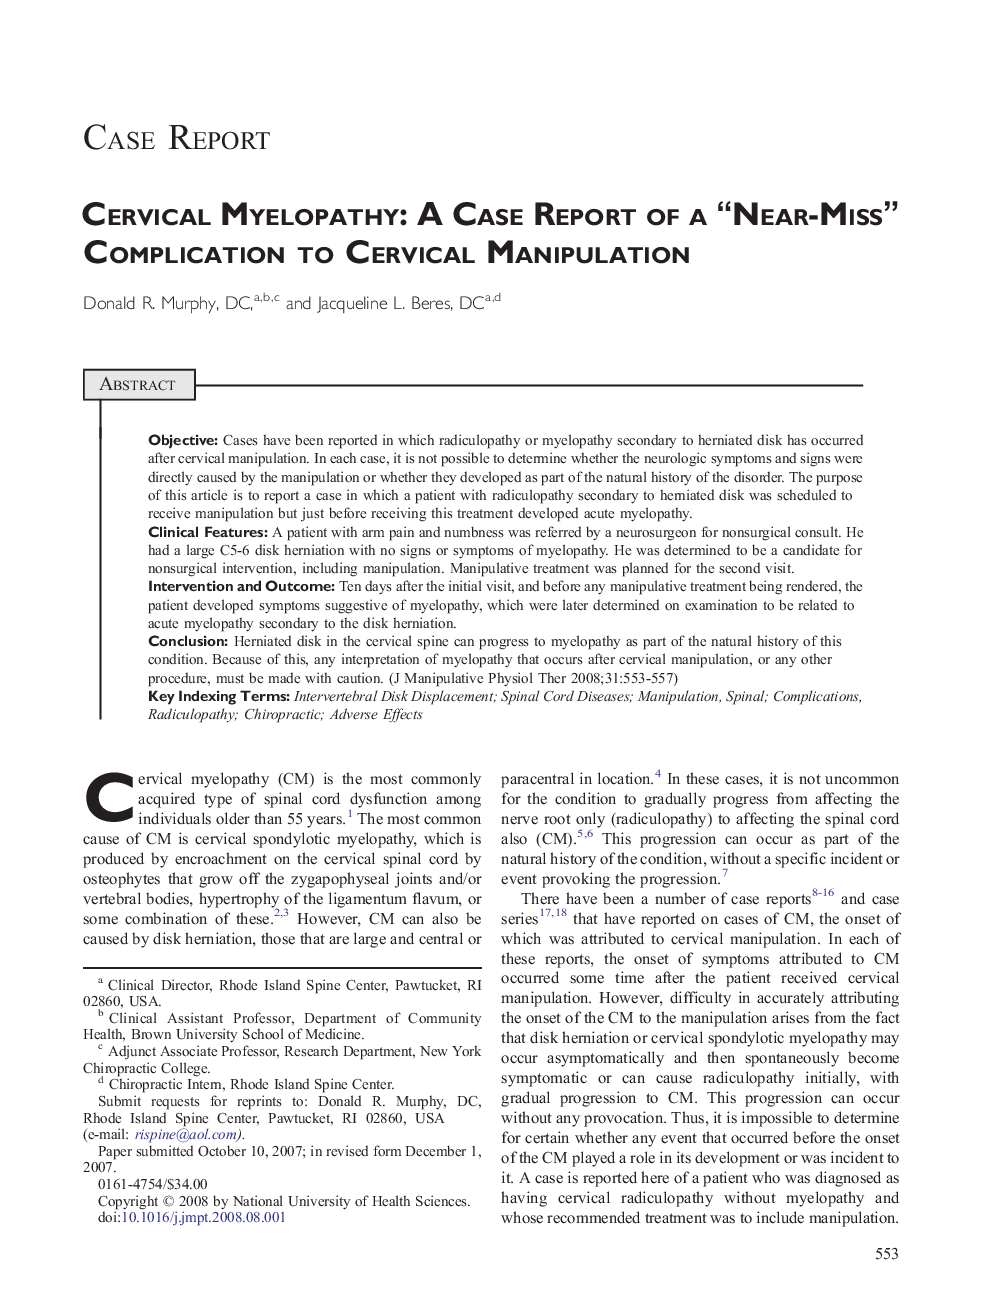 Cervical Myelopathy: A Case Report of a “Near-Miss” Complication to Cervical Manipulation